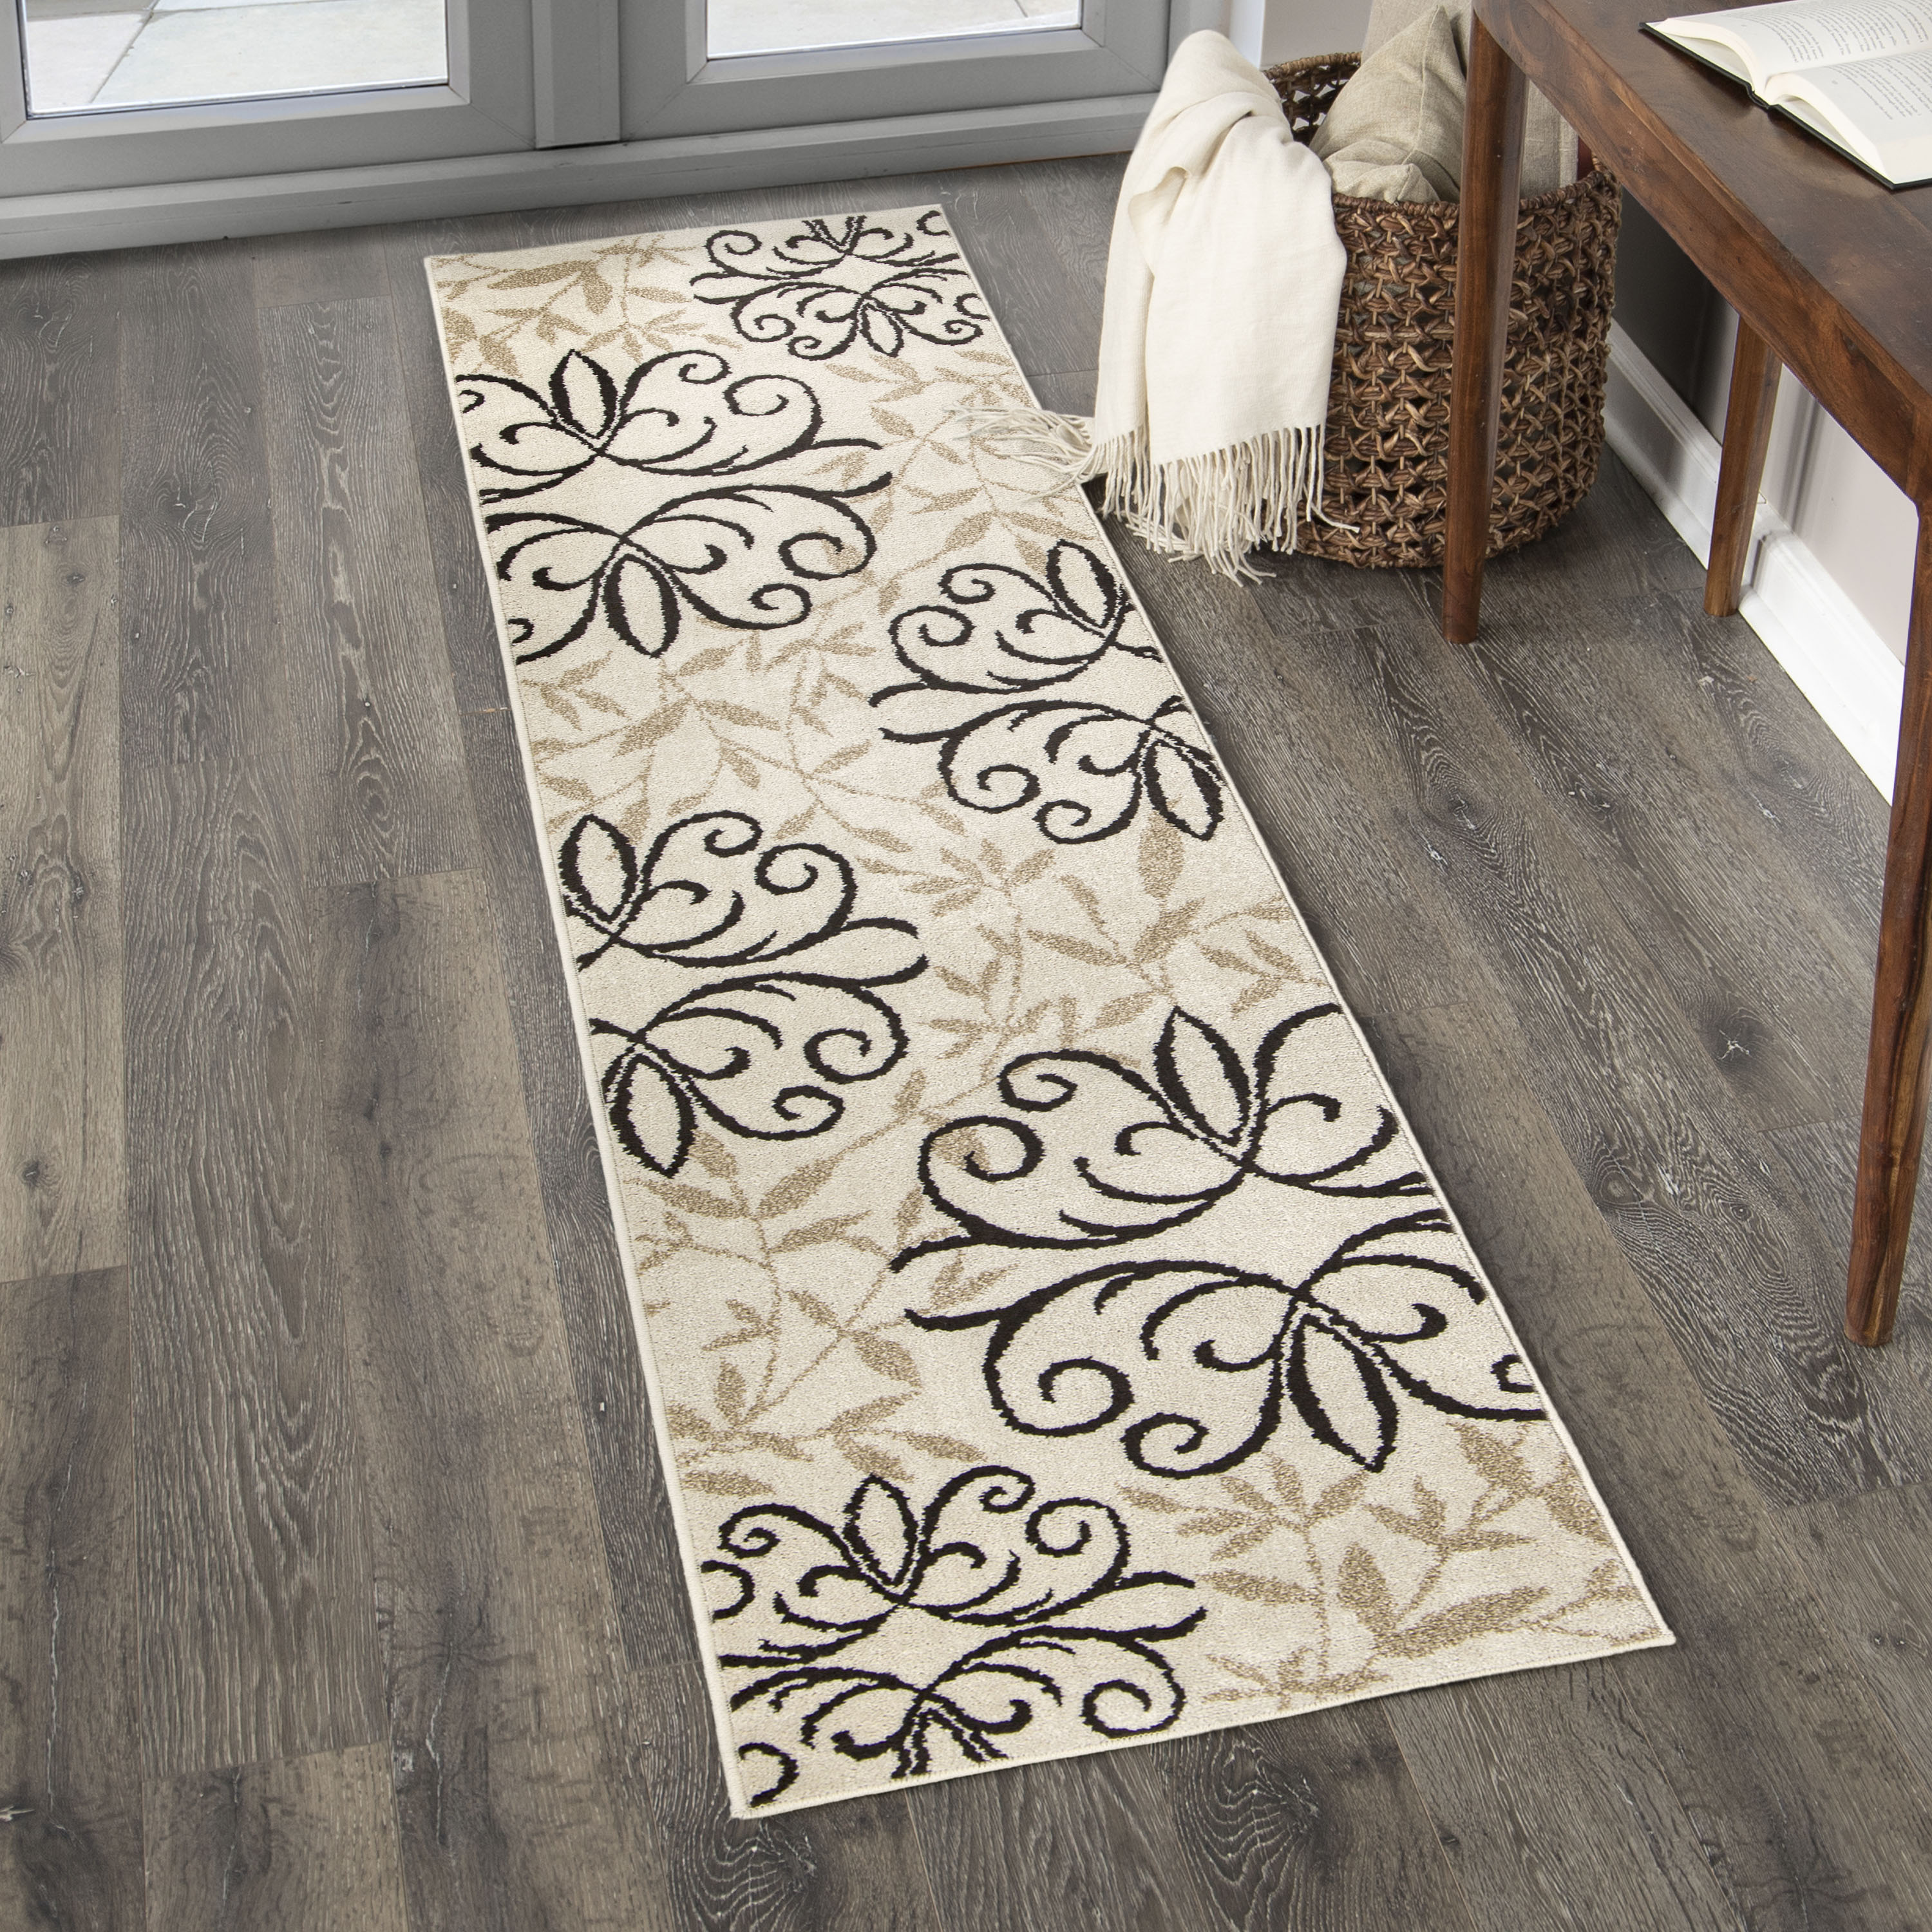 Better Homes & Gardens Iron Fleur Area Rug, Off-White, 1'11" x 7'5" - image 1 of 9